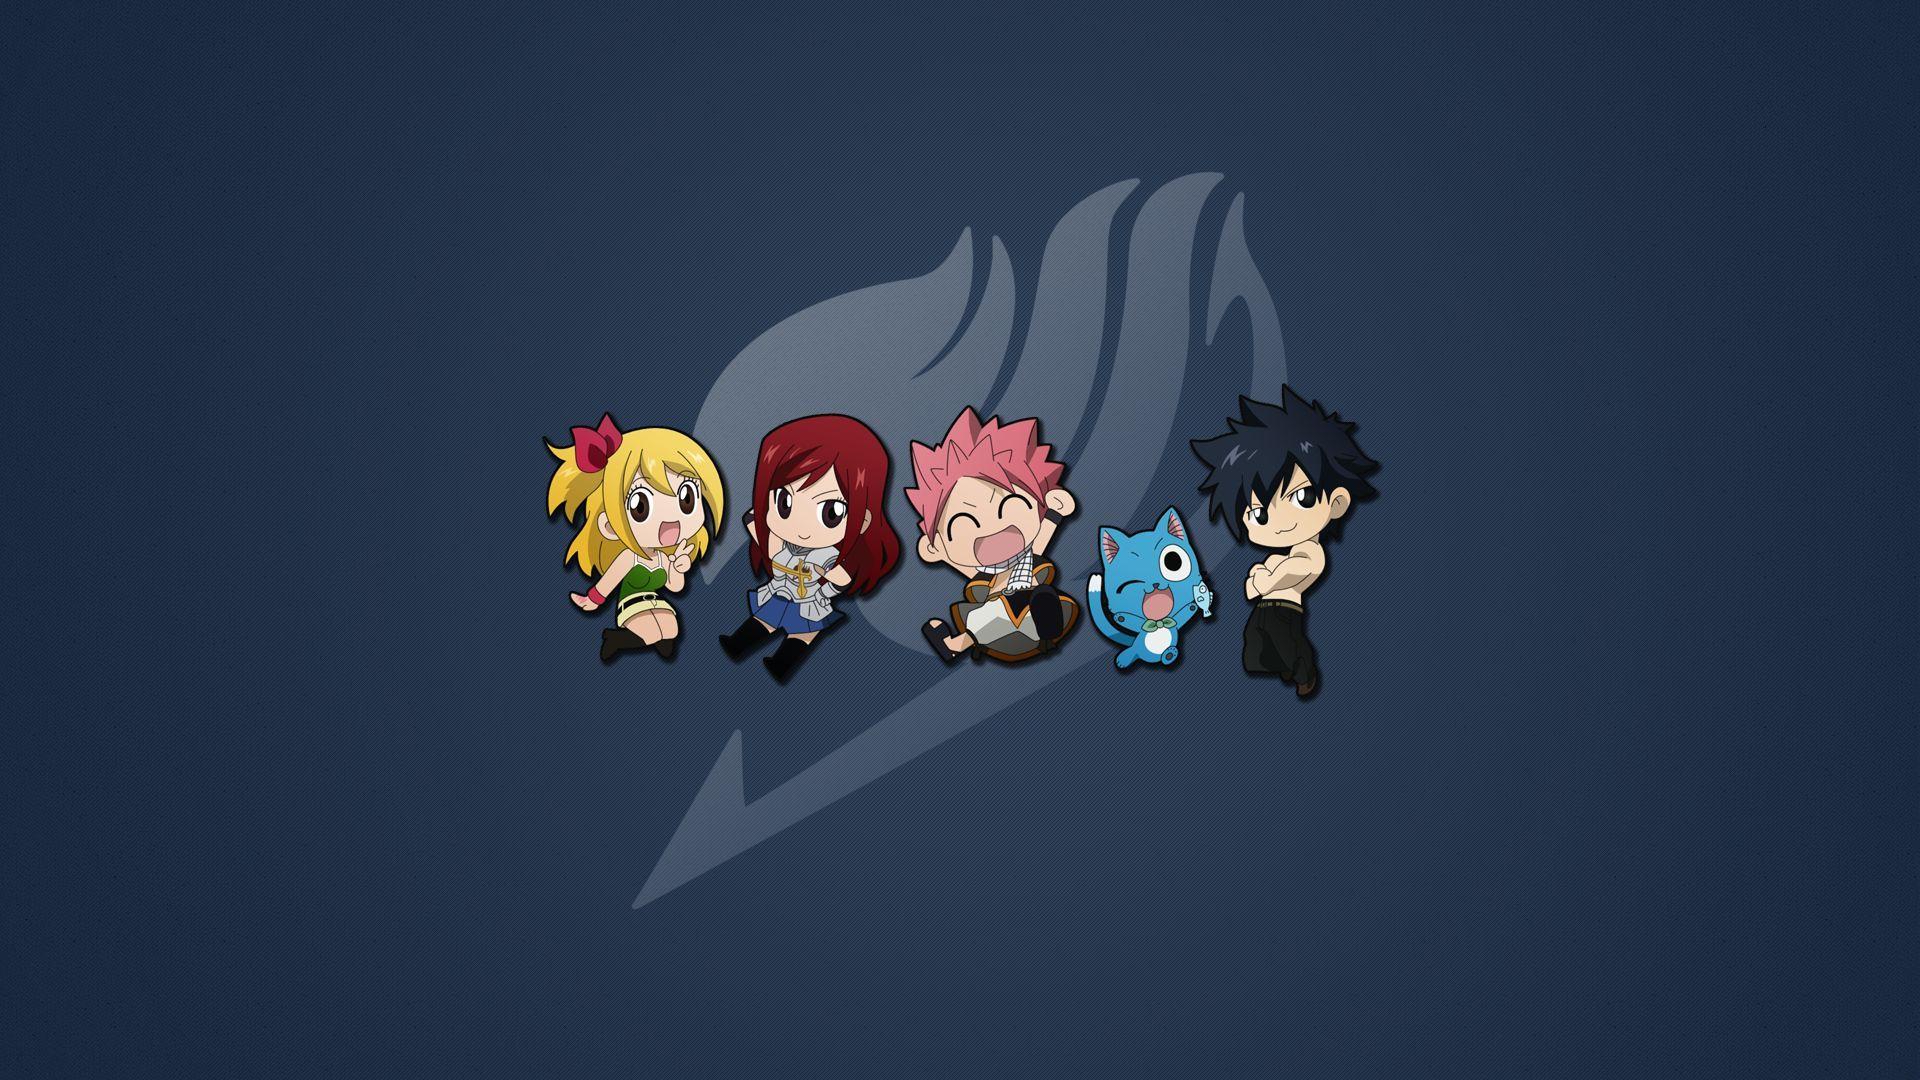 Chibi Fairy Tail Wallpapers Top Free Chibi Fairy Tail